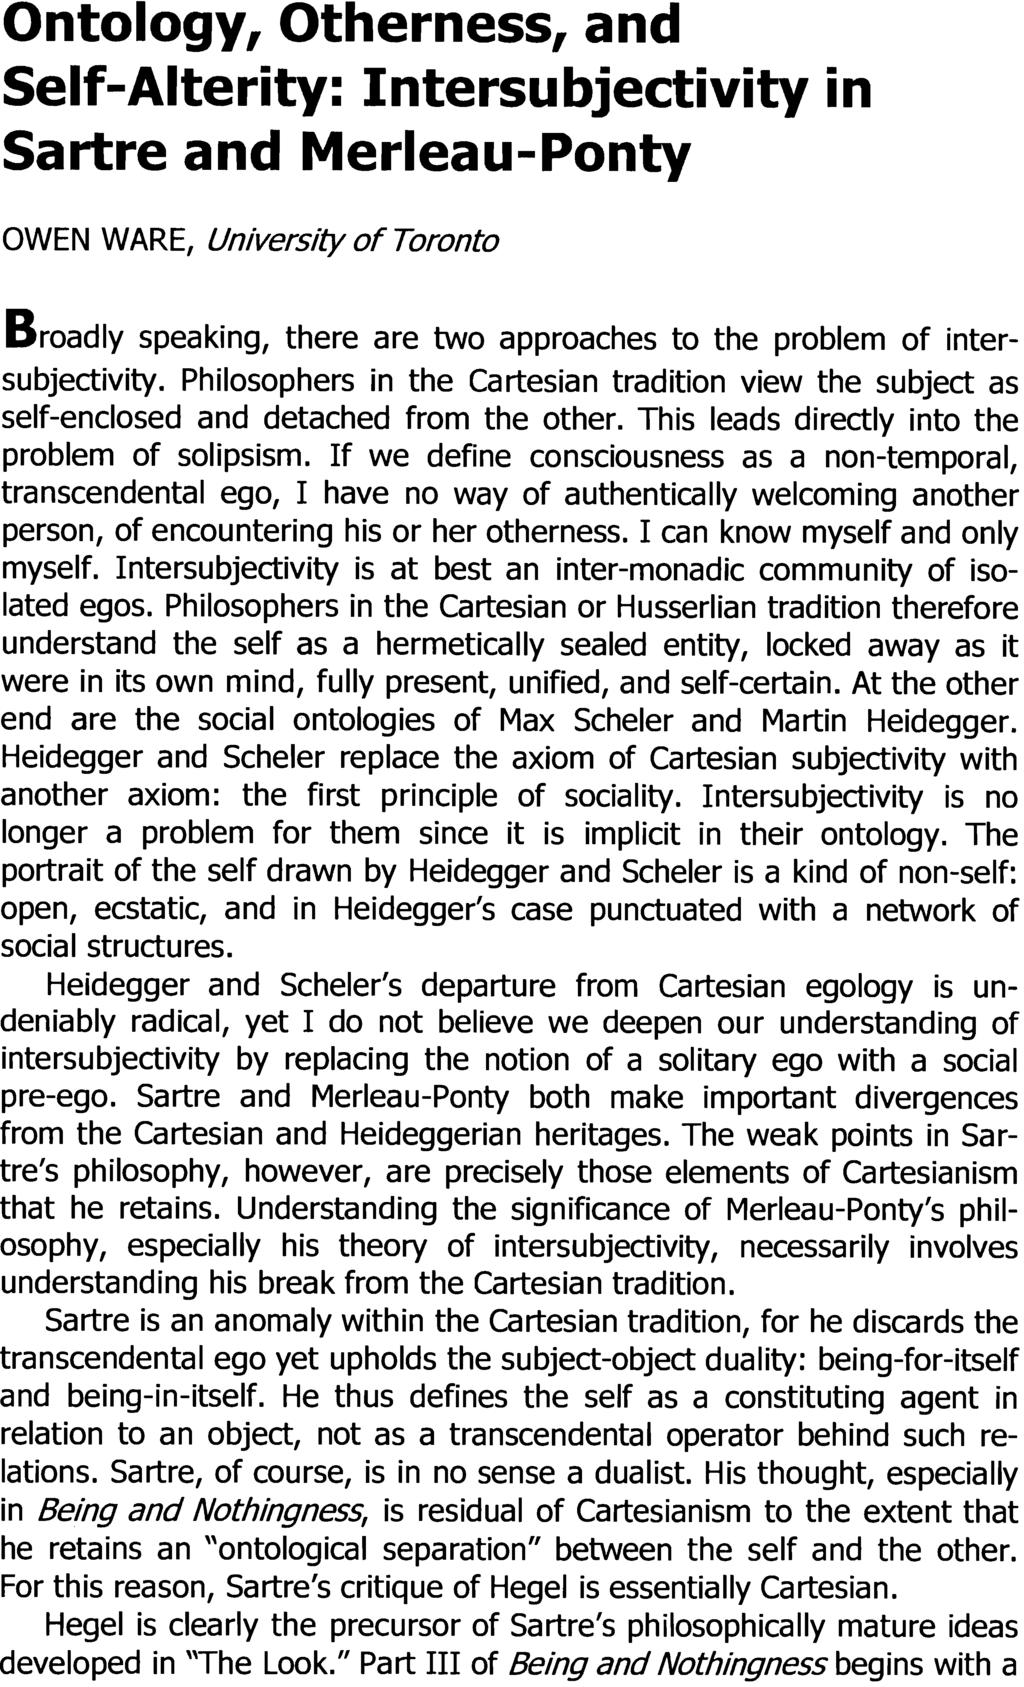 Ontology, Otherness, and Self-Alterity: Intersubjectivity in Sartre and Merleau-Ponty OWEN WARE, University of Toronto Broadly speaking, there are two approaches to the problem of intersubjectivity.